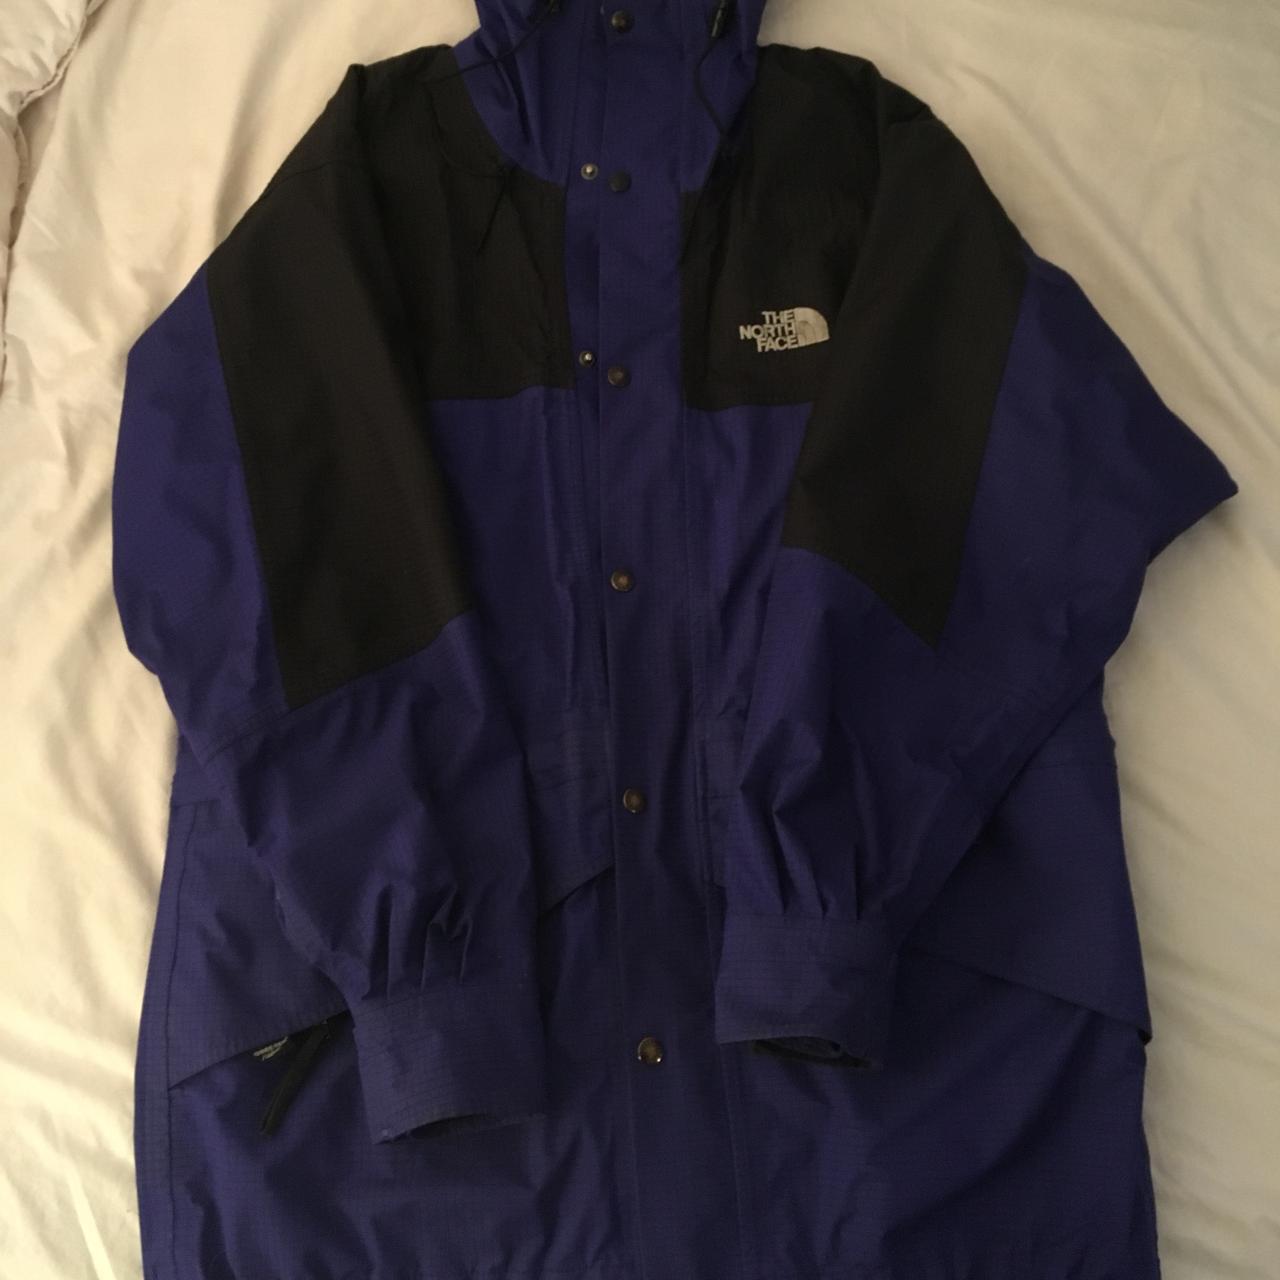 North Face Gore-Tex All Weather Jacket. 100%... - Depop